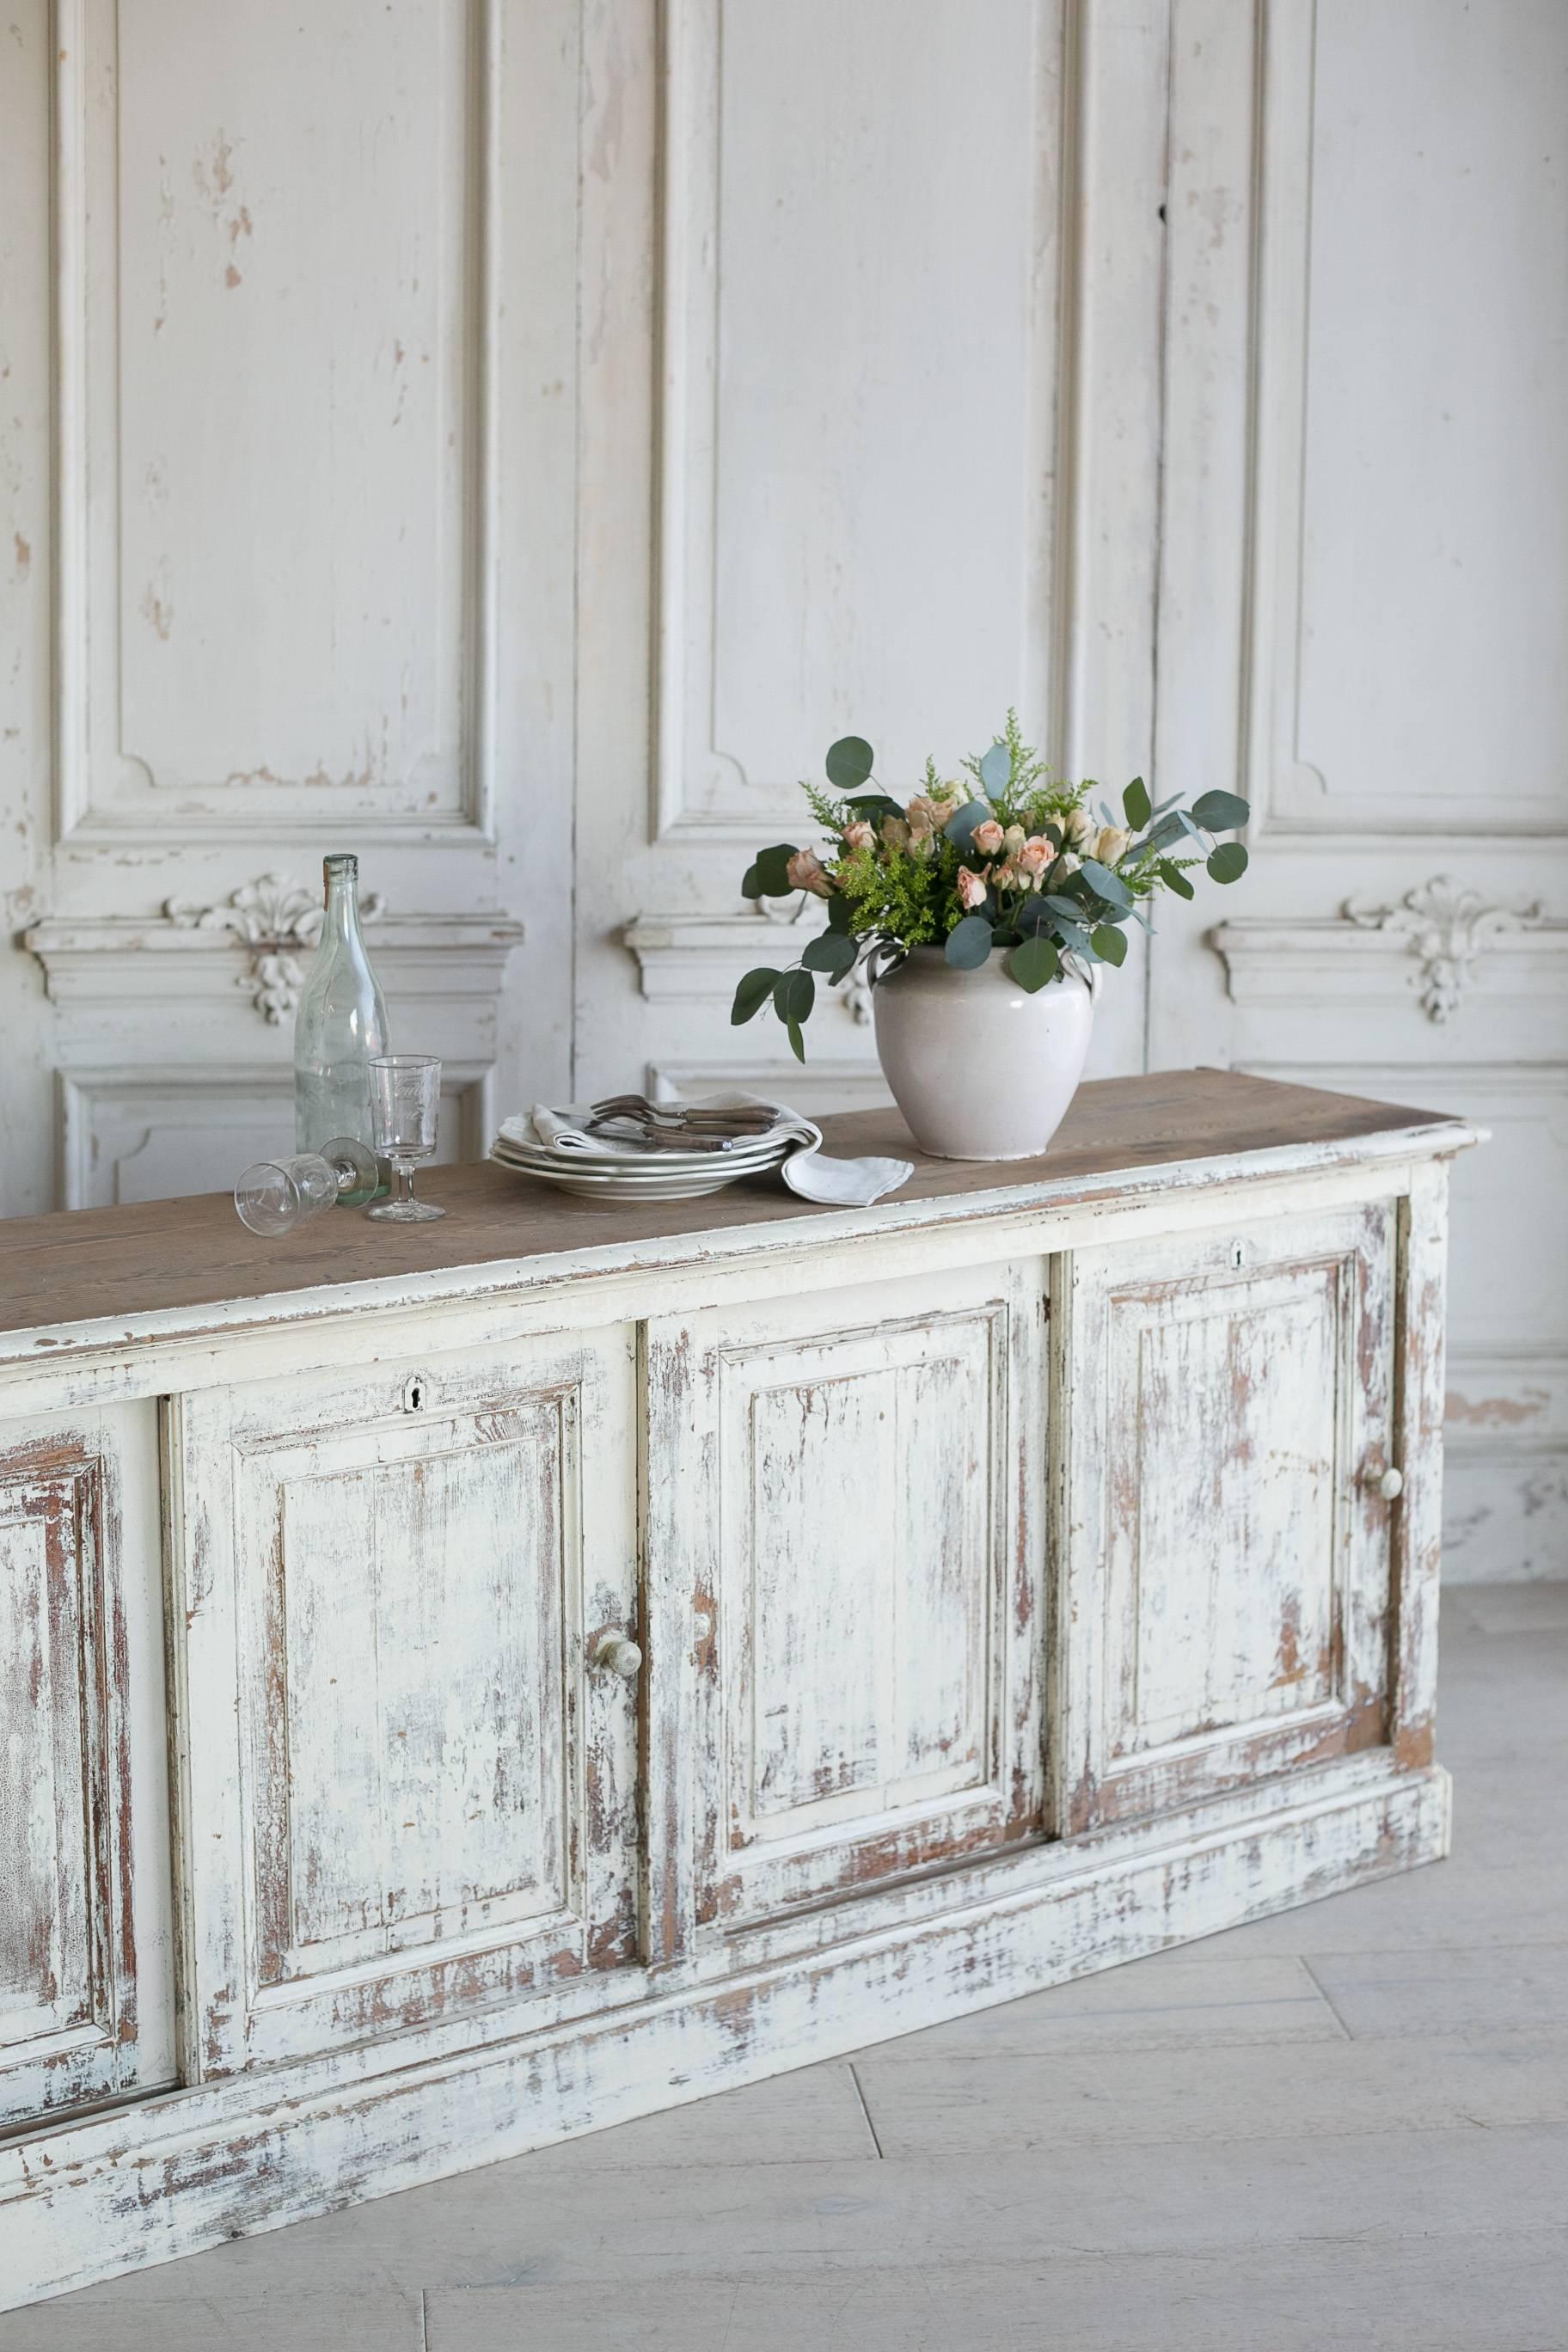 Stunning, extra long antique sideboard in distressed buttermilk finish. This narrow sideboard has an enormous amount of storage in the eight sliding cupboards presented counter style. Will add dramatic country farmhouse style to a dining room or